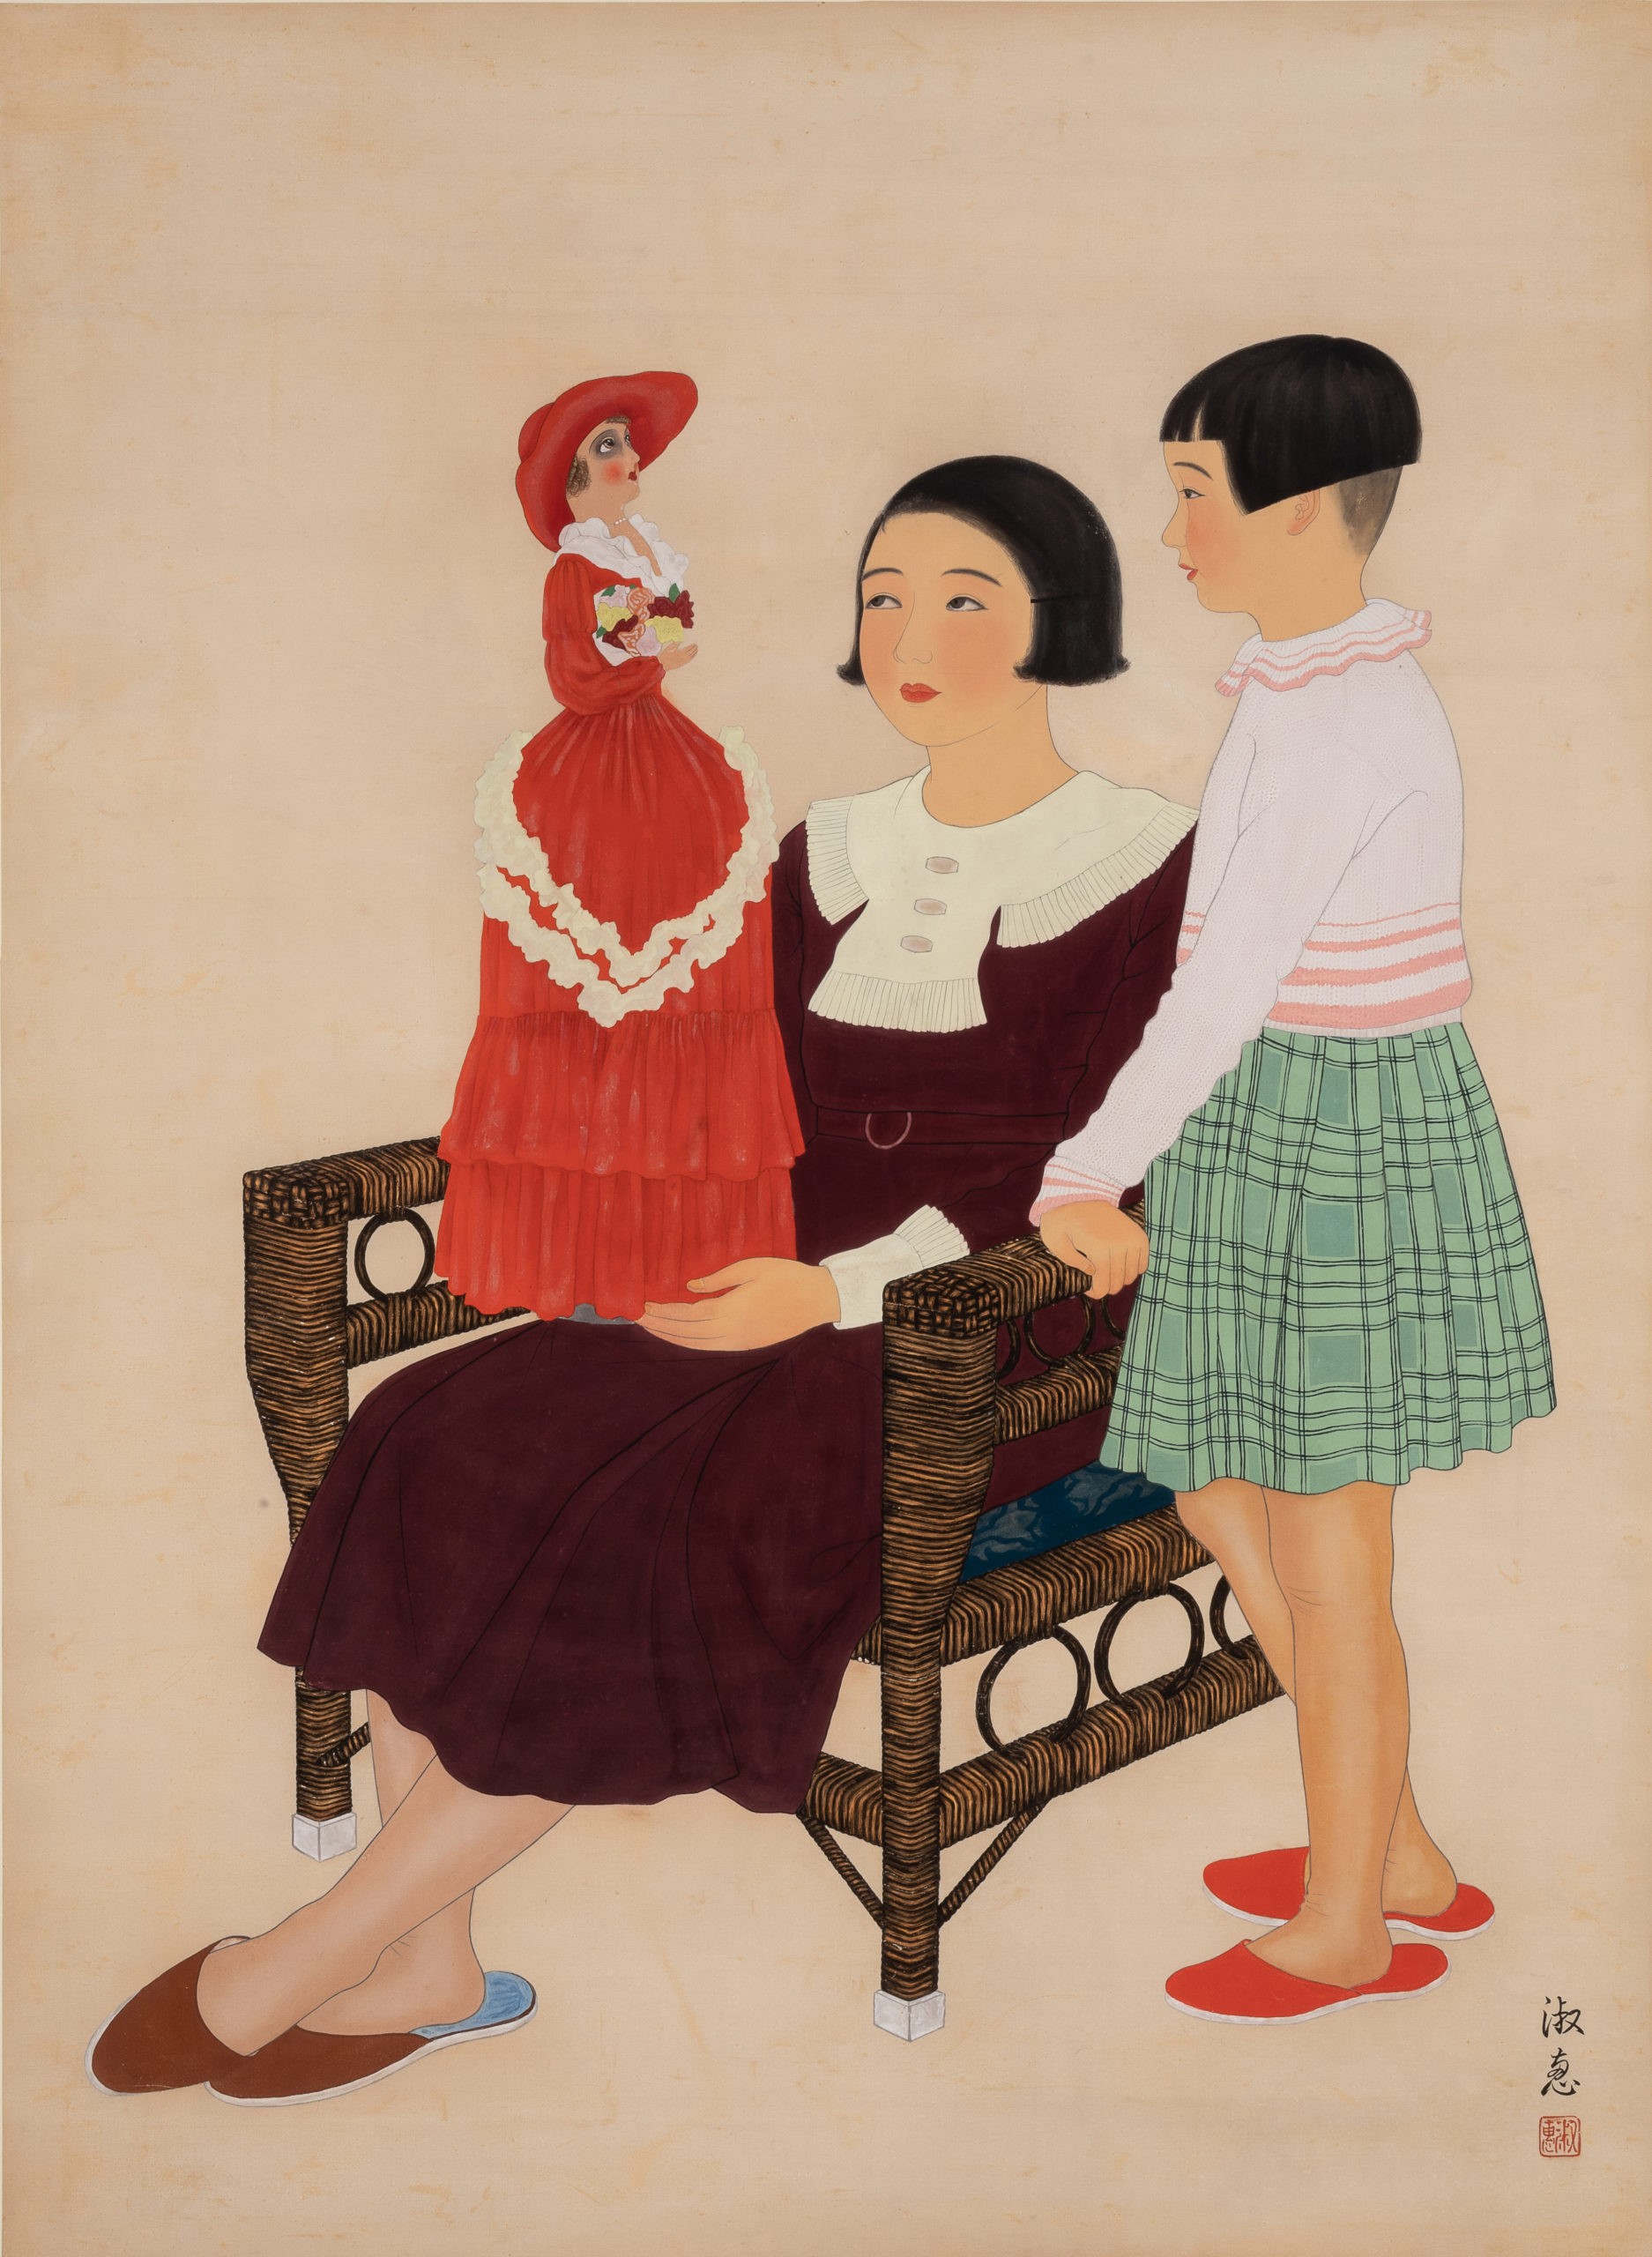 a painting showing a woman sitting in a wicker chair holding up a doll in a French-style red and white dress while a young girl stands next to her, both the woman and girl are looking at the doll